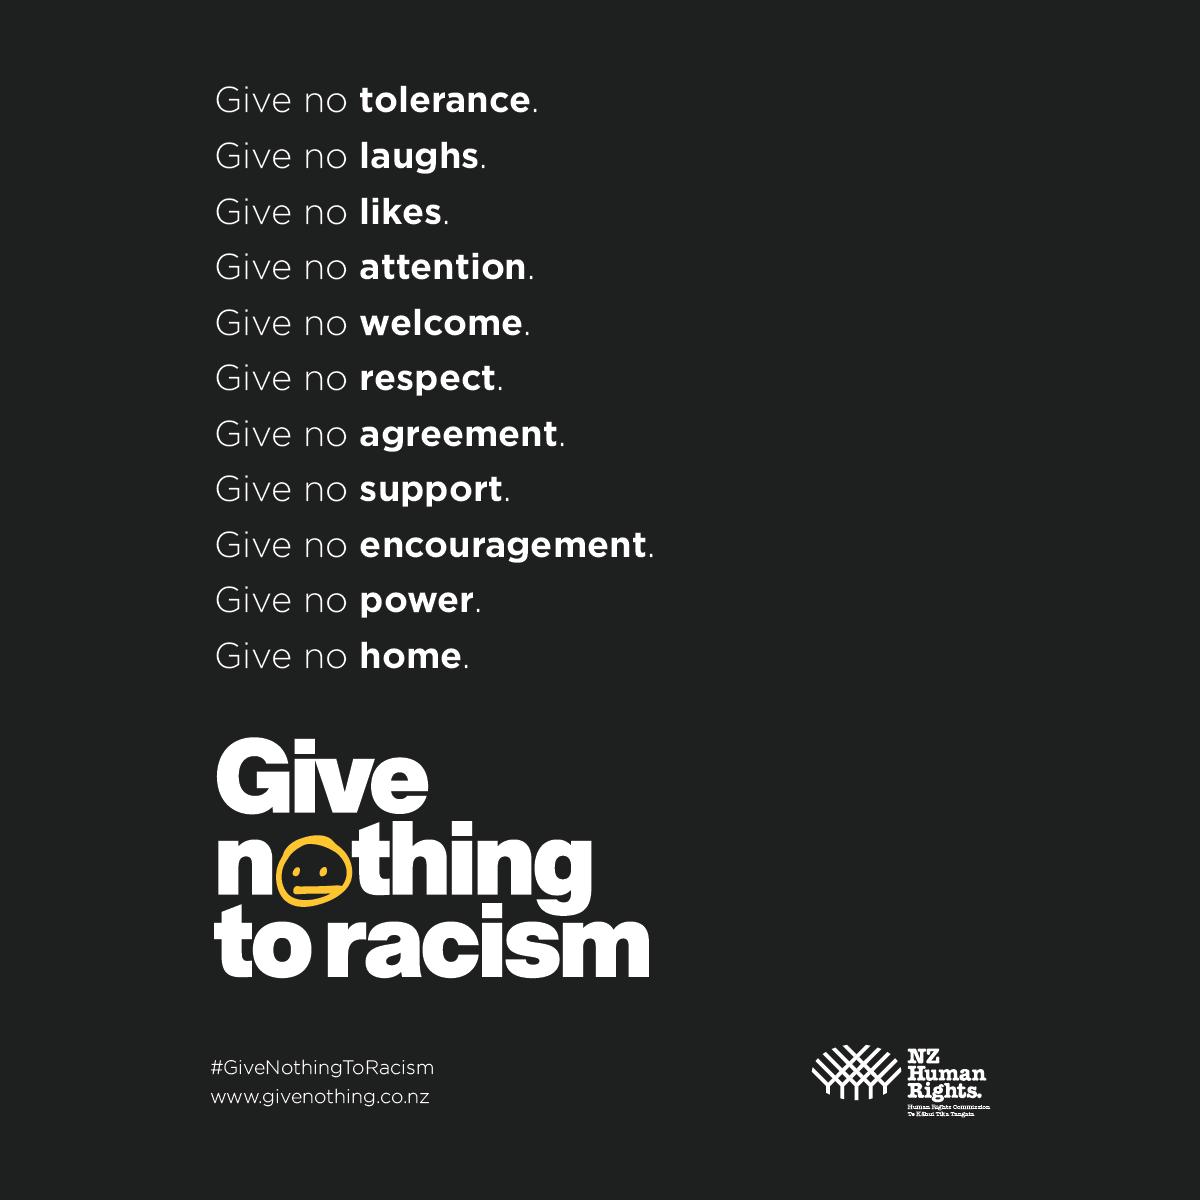 Give nothing to racism